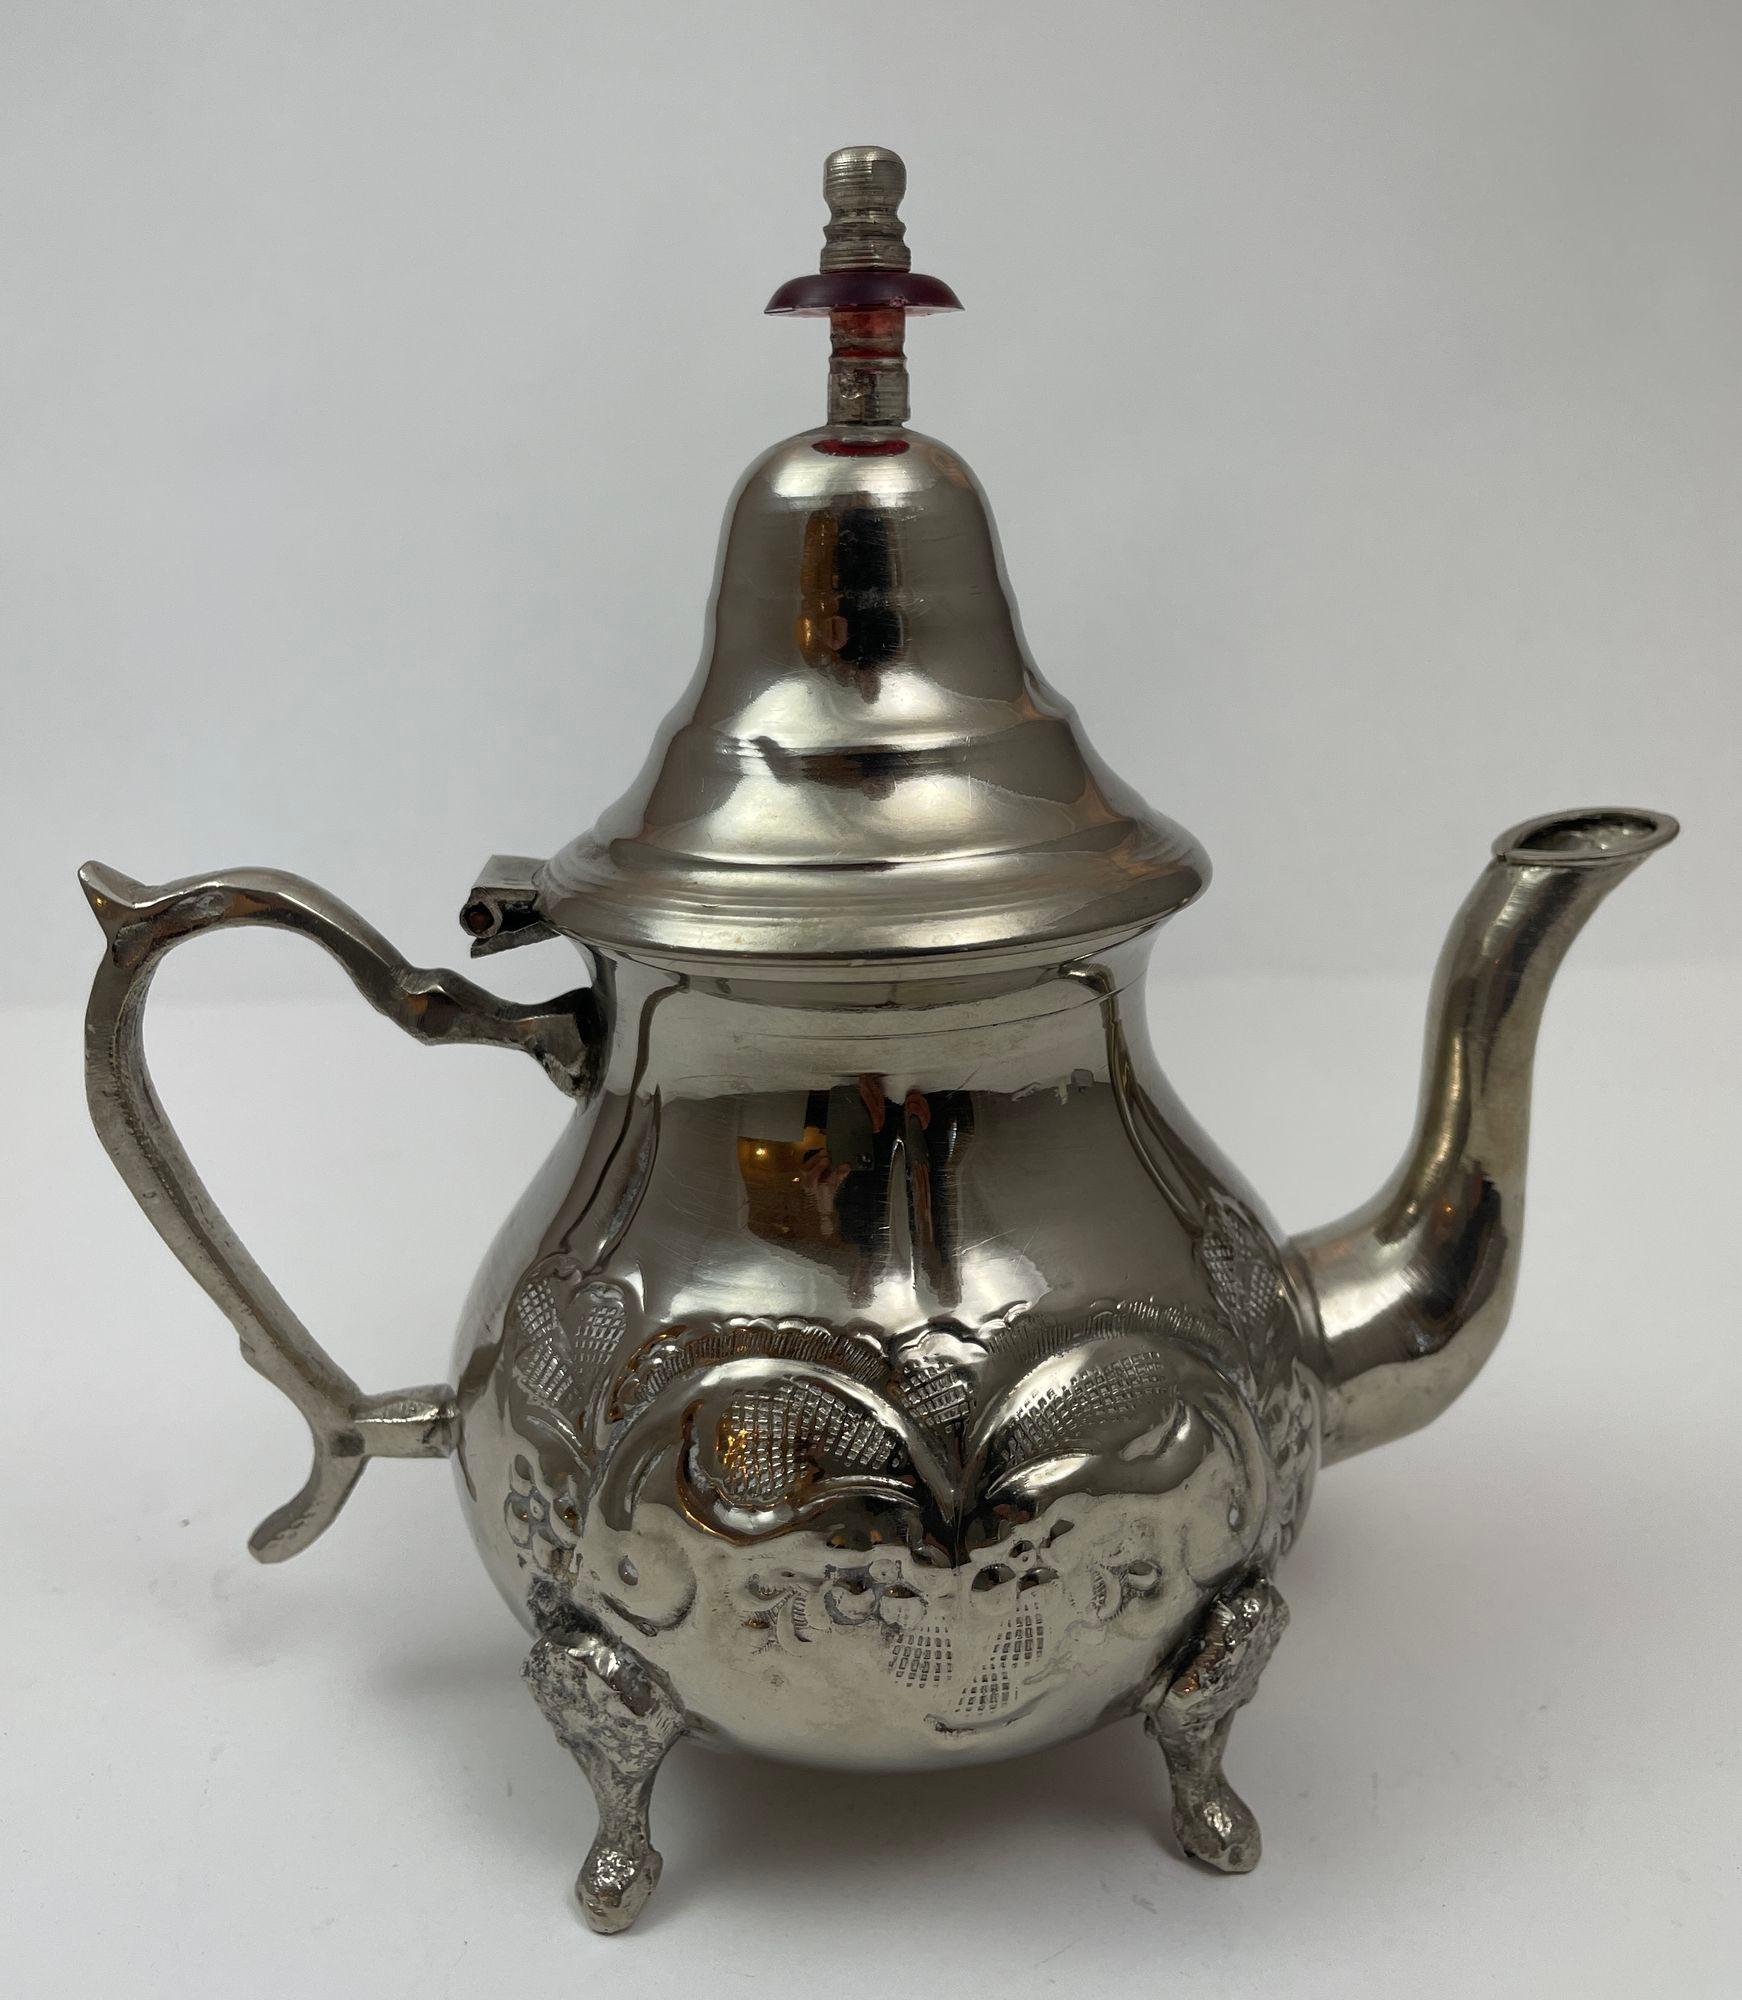 Vintage classic aged Moroccan silver plated tea pot. Handcrafted in Morocco.
Vintage Moroccan teapot from the older areas of the brass market of Marrakesh.
They are created from nickel silver or brass or a combination of the two.
Great silver plated